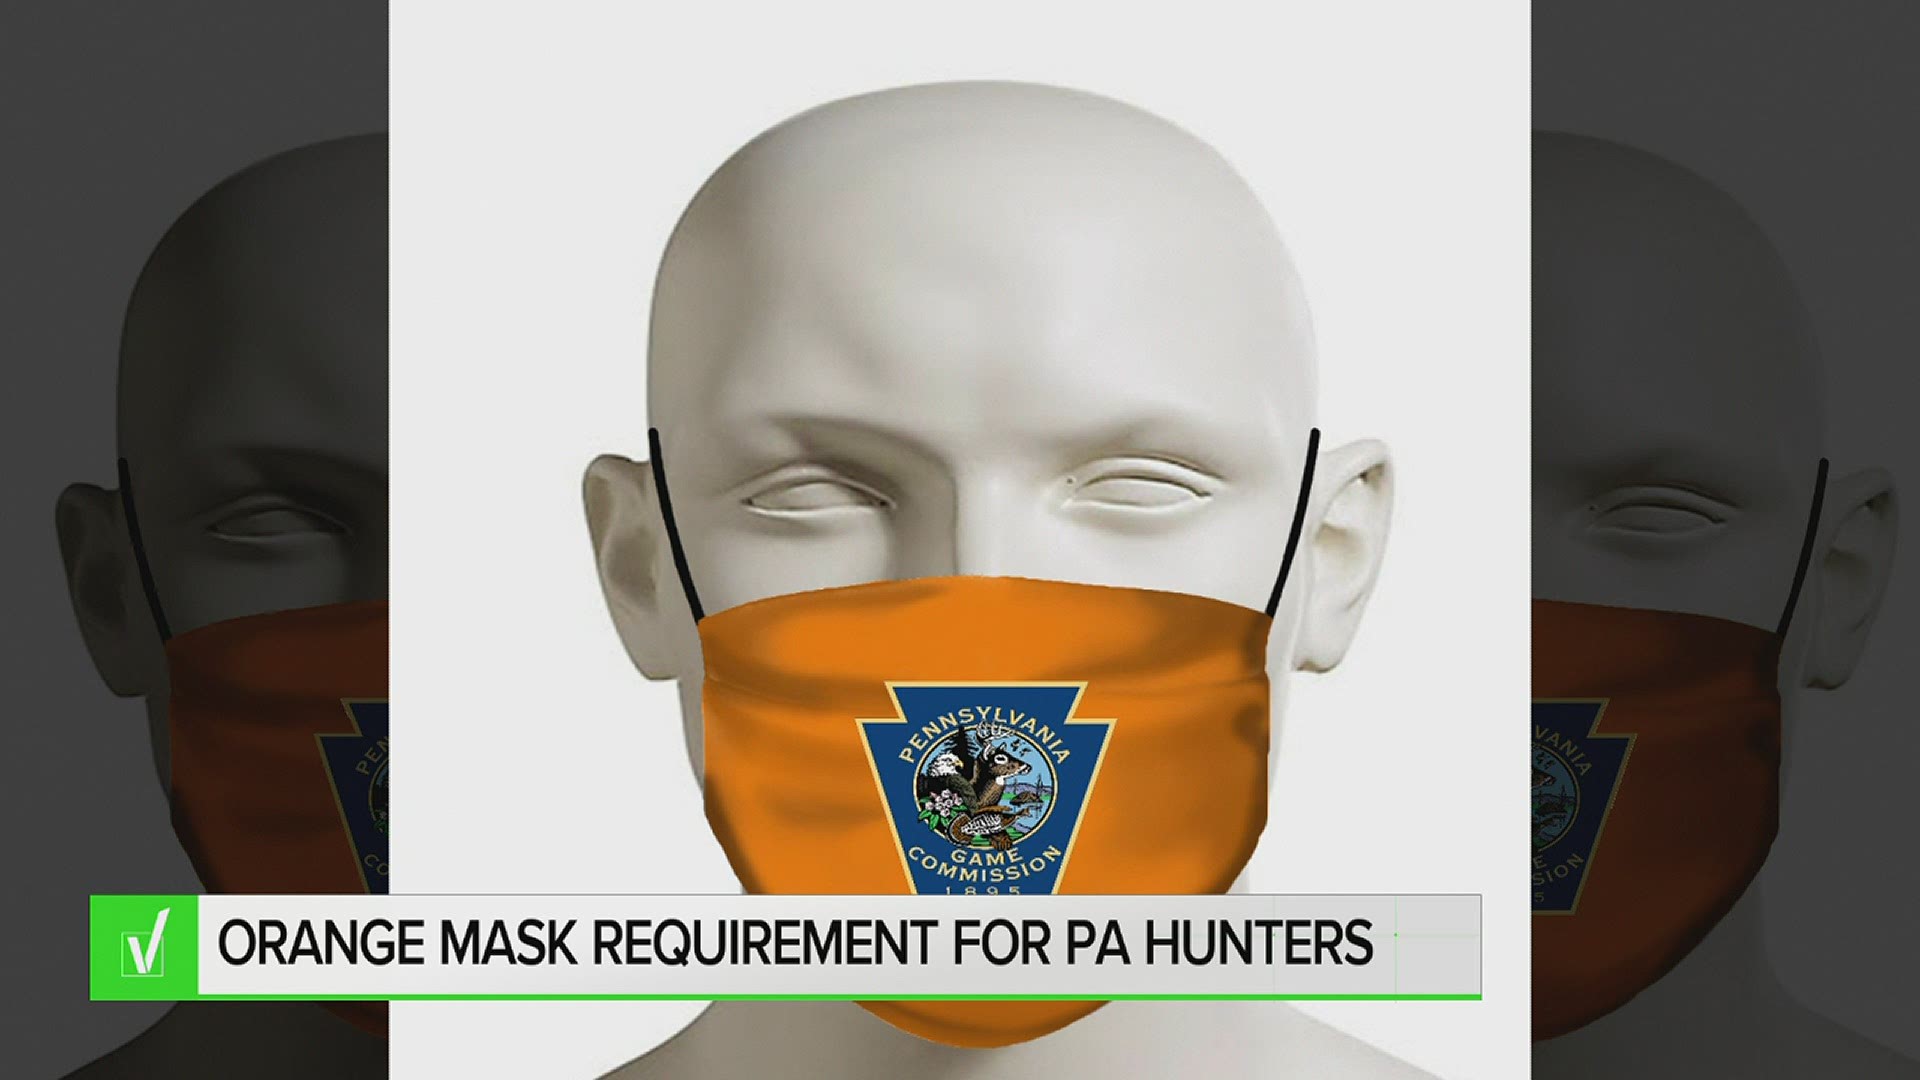 A viral post has been circulating on social media stating that hunters are required to wear the orange masks that feature the Game Commission's logo.